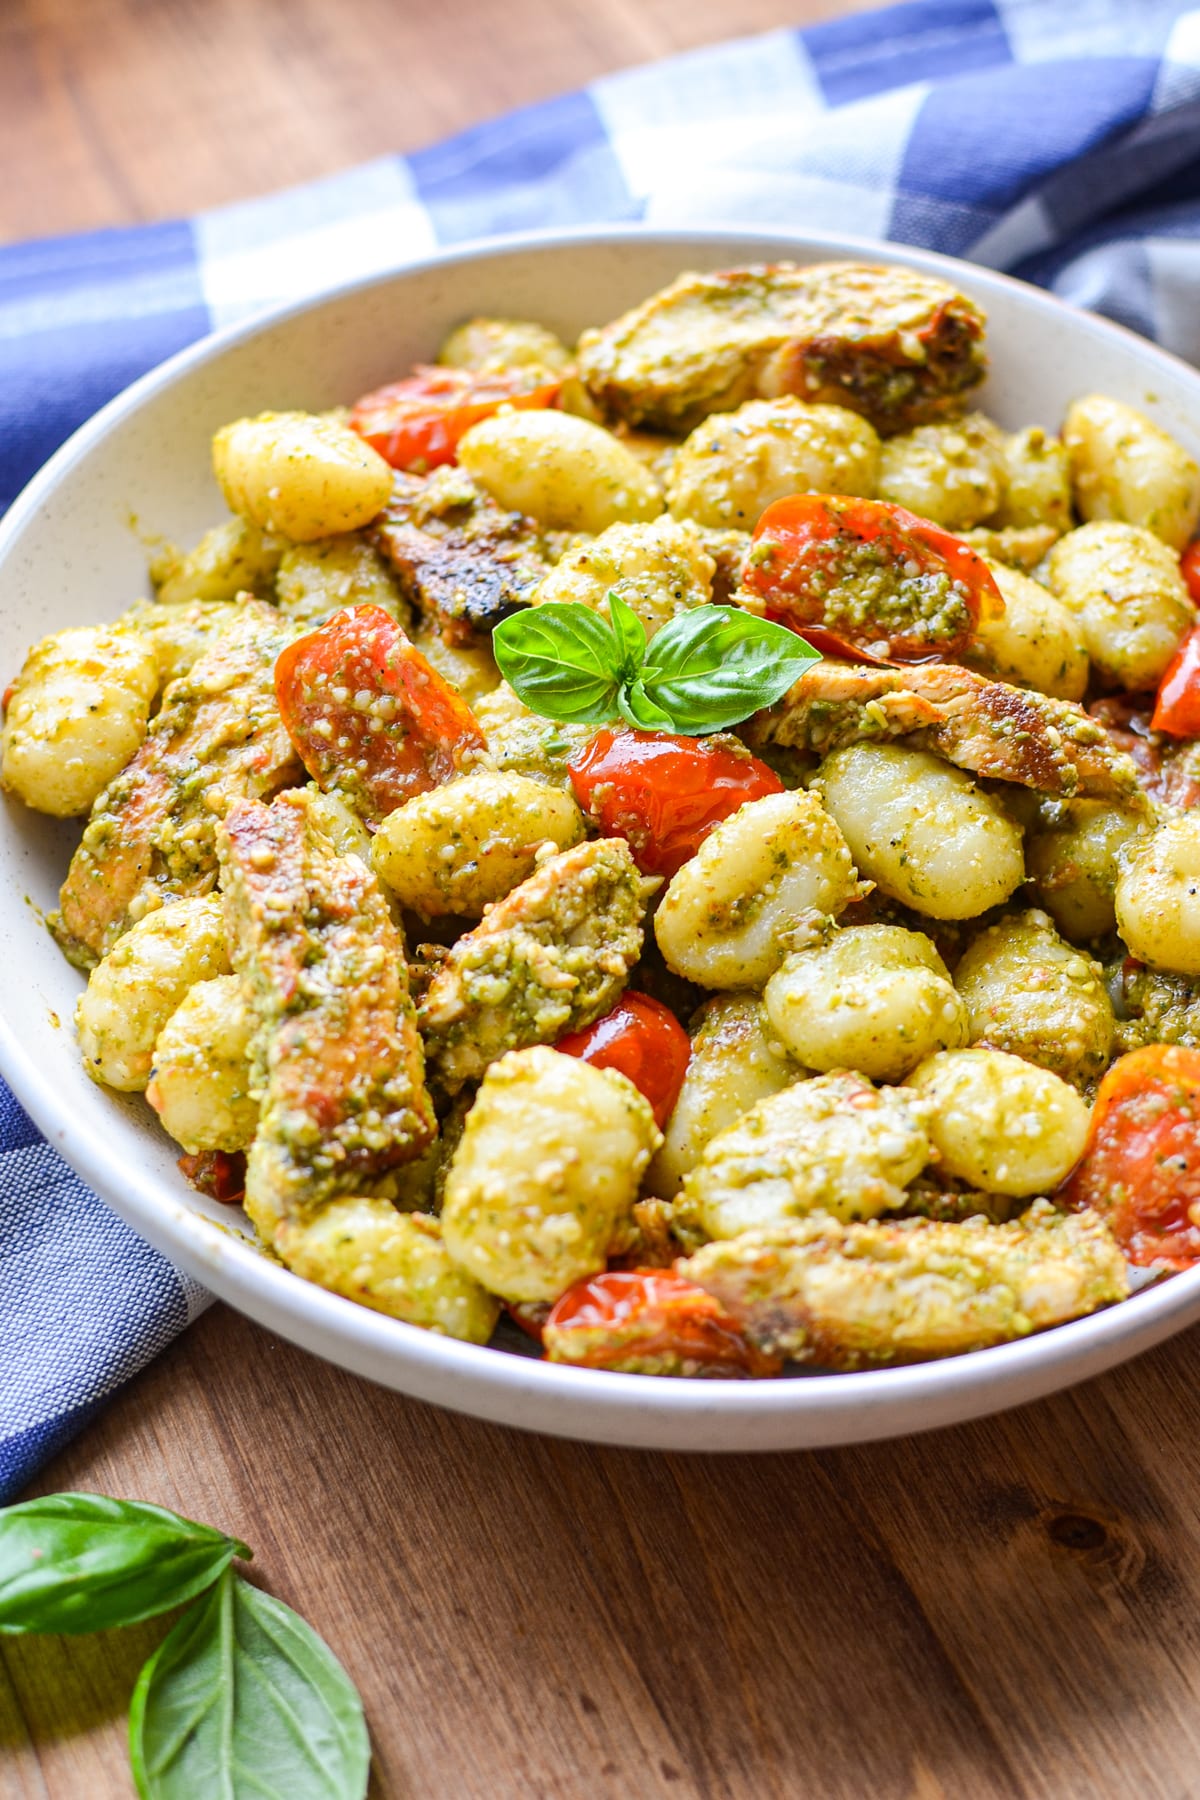 A bowl of gnocchi tossed with pesto and garnished with basil.